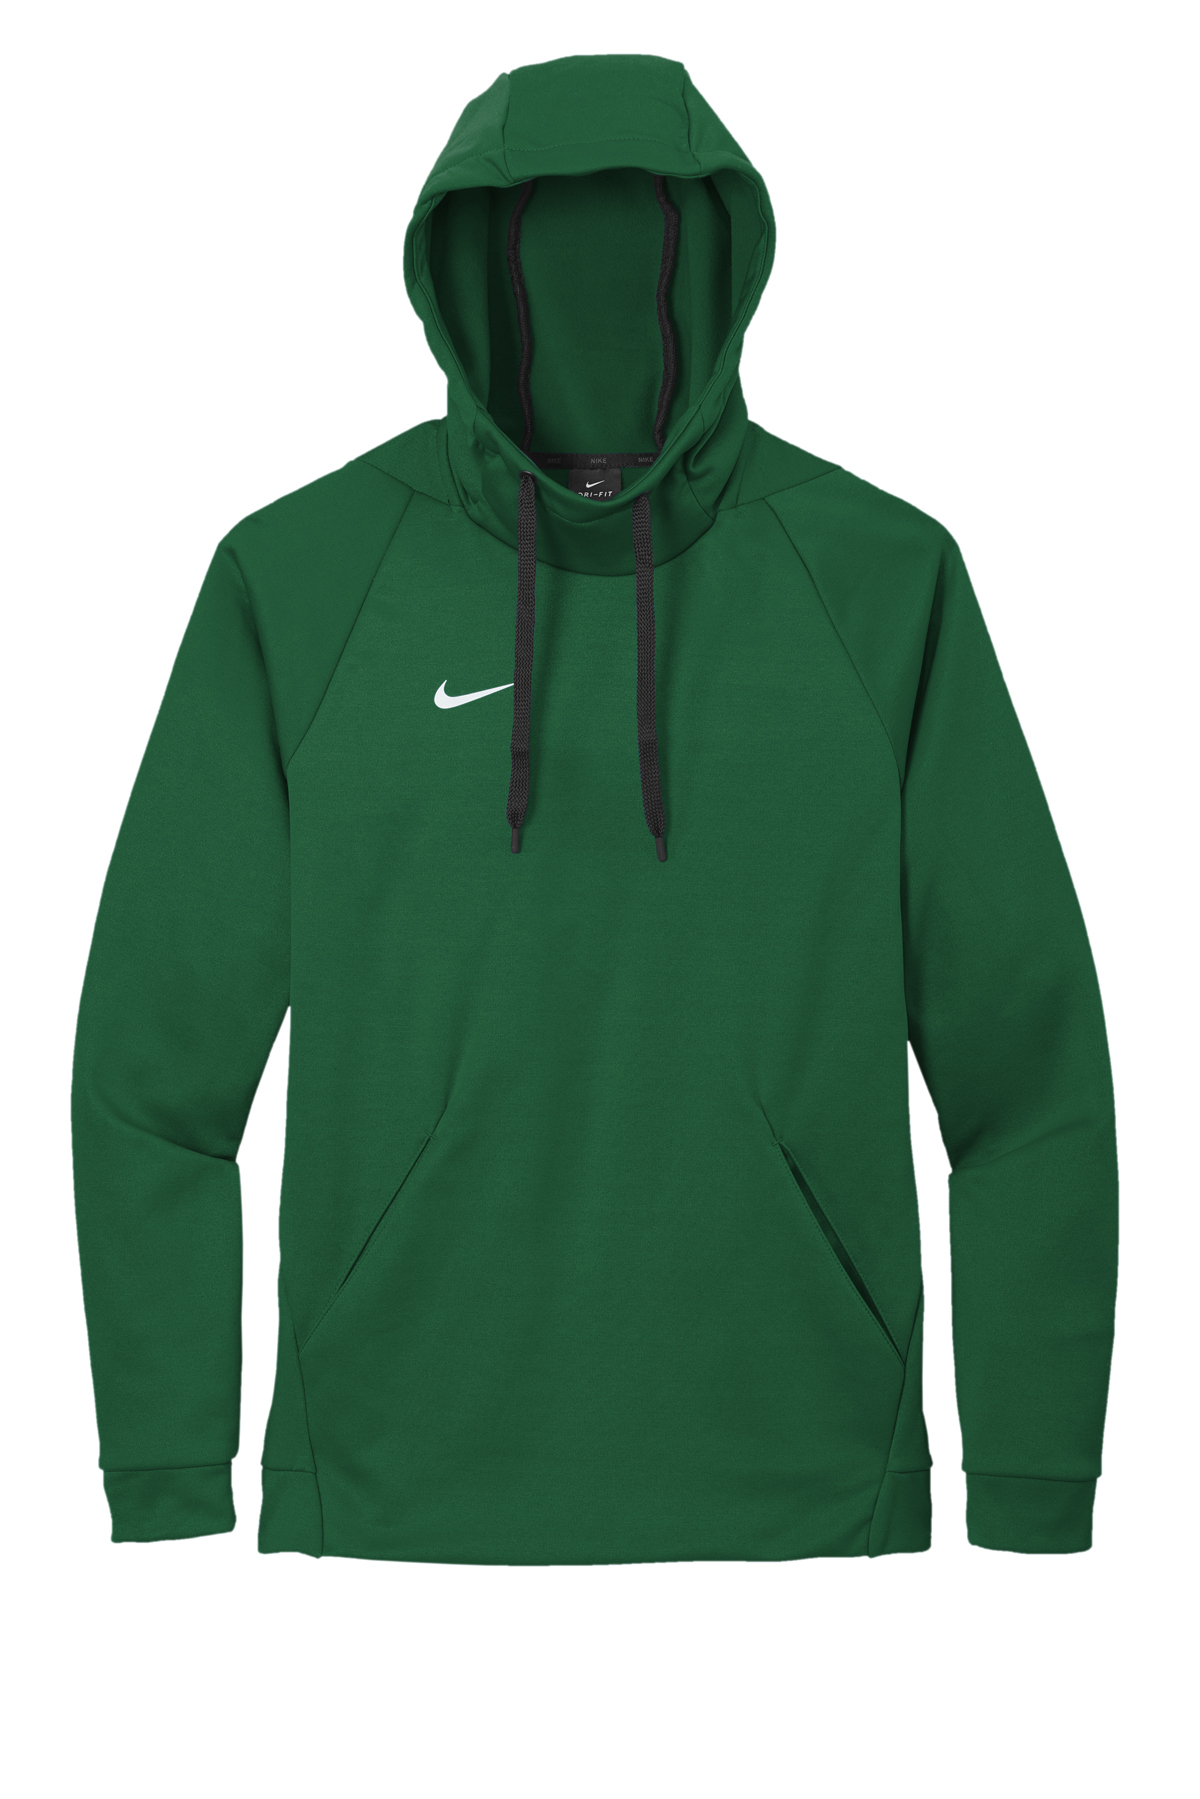 Nike Therma-FIT Pullover Fleece Hoodie, Product